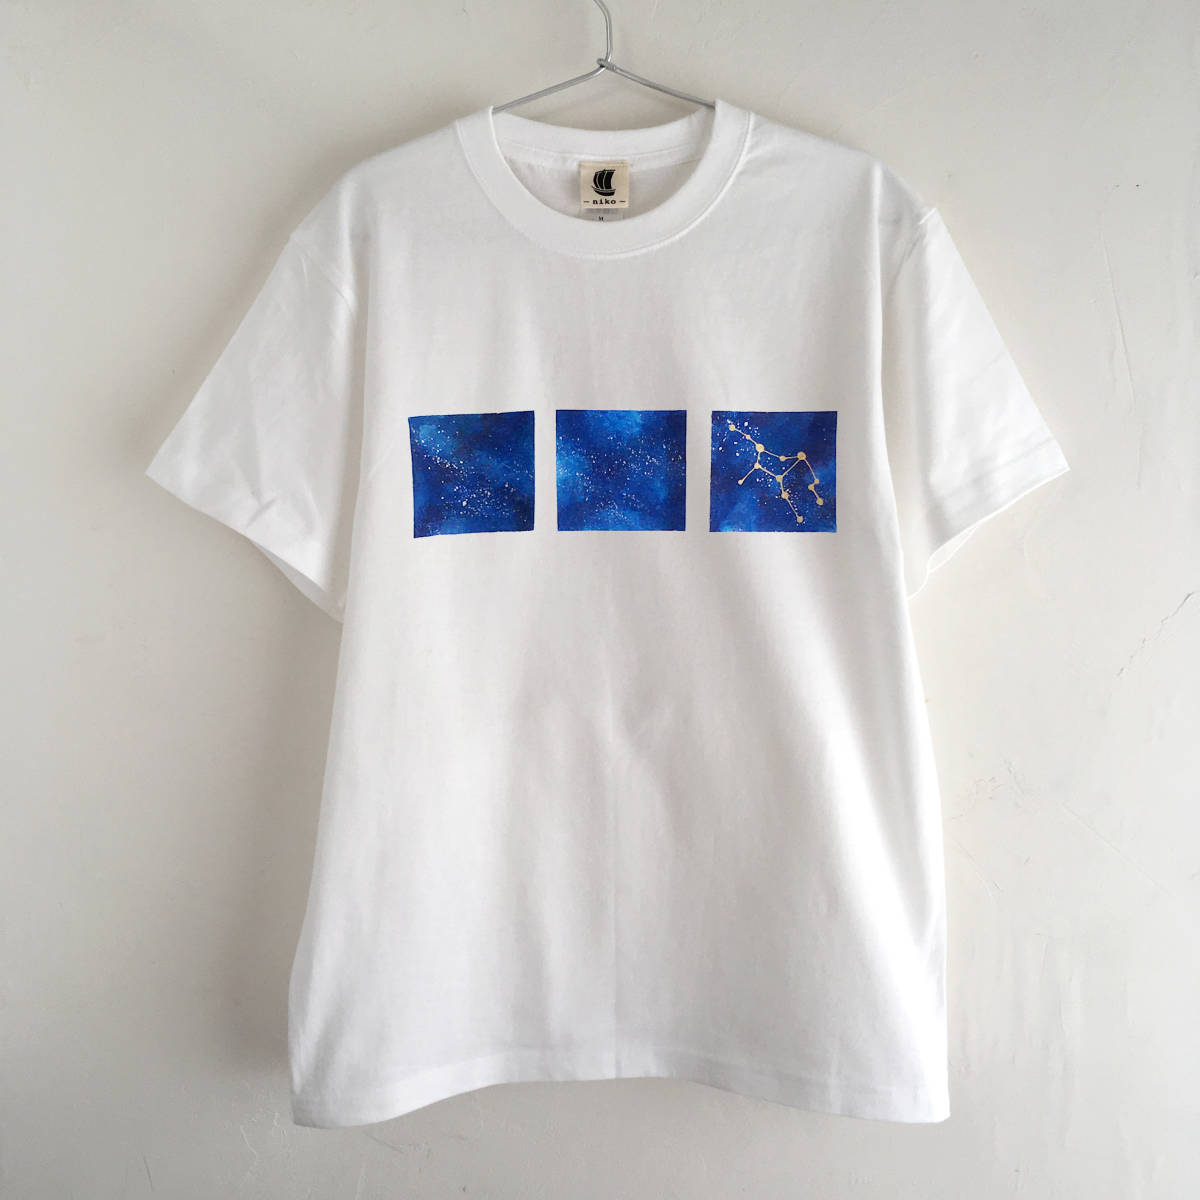 Hand-drawn space pattern T-shirt with 12 constellations to choose from, white, L size, galaxy, starry sky, L size, round neck, patterned